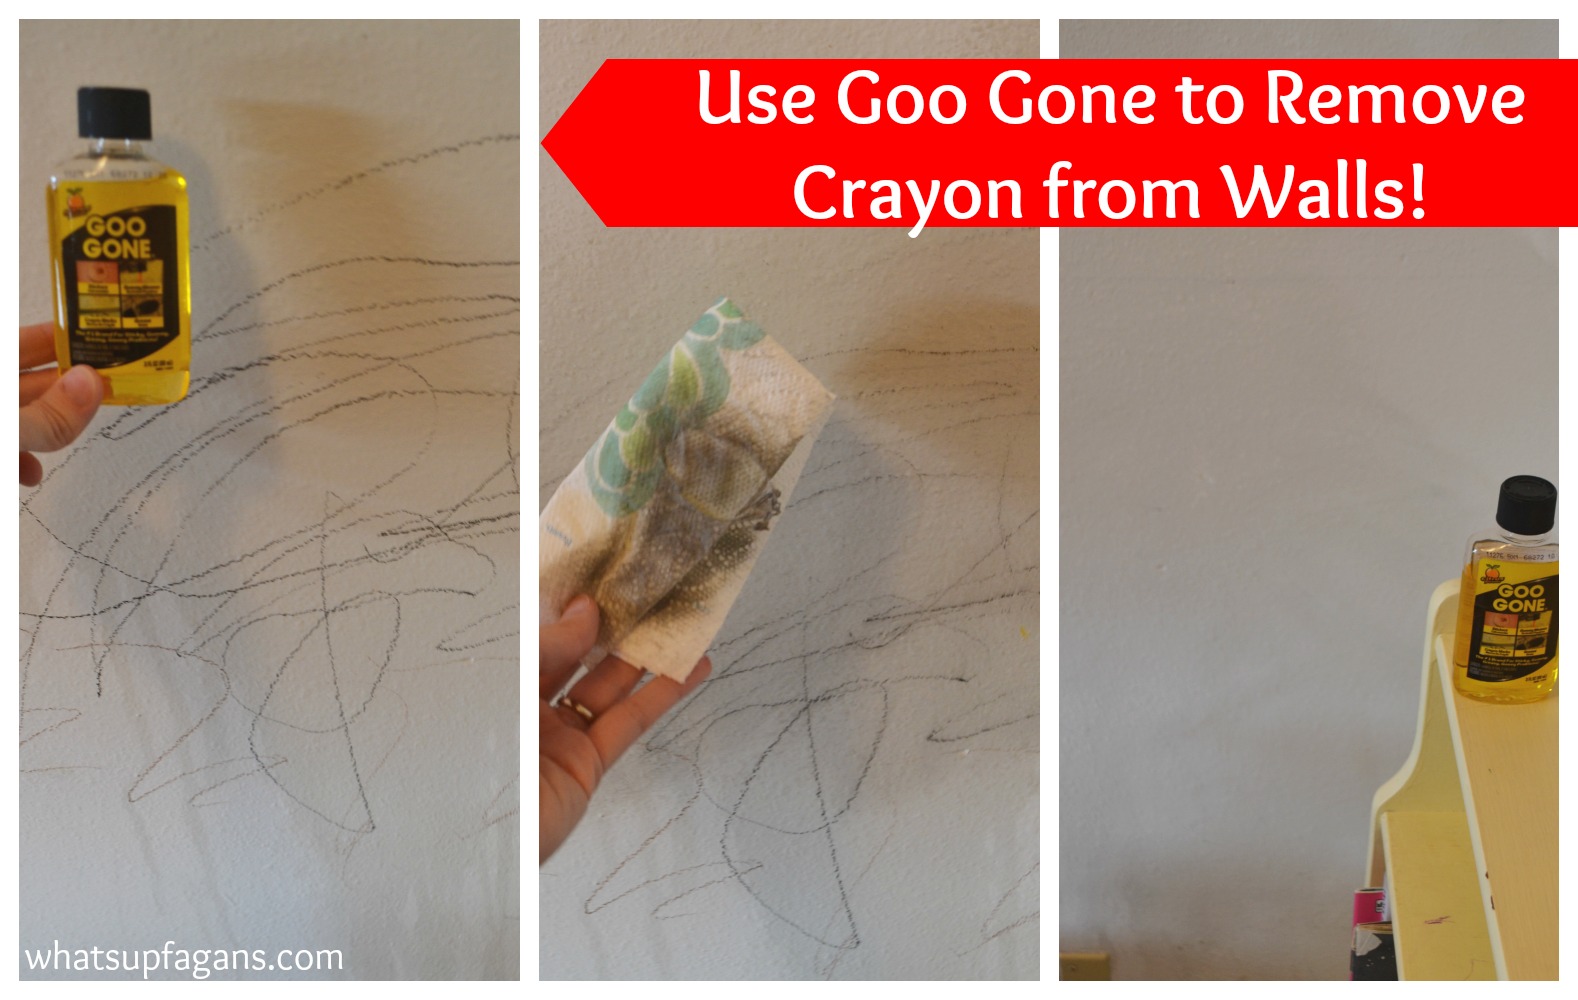 25 Methods that Actually Work to Remove Crayon from Walls